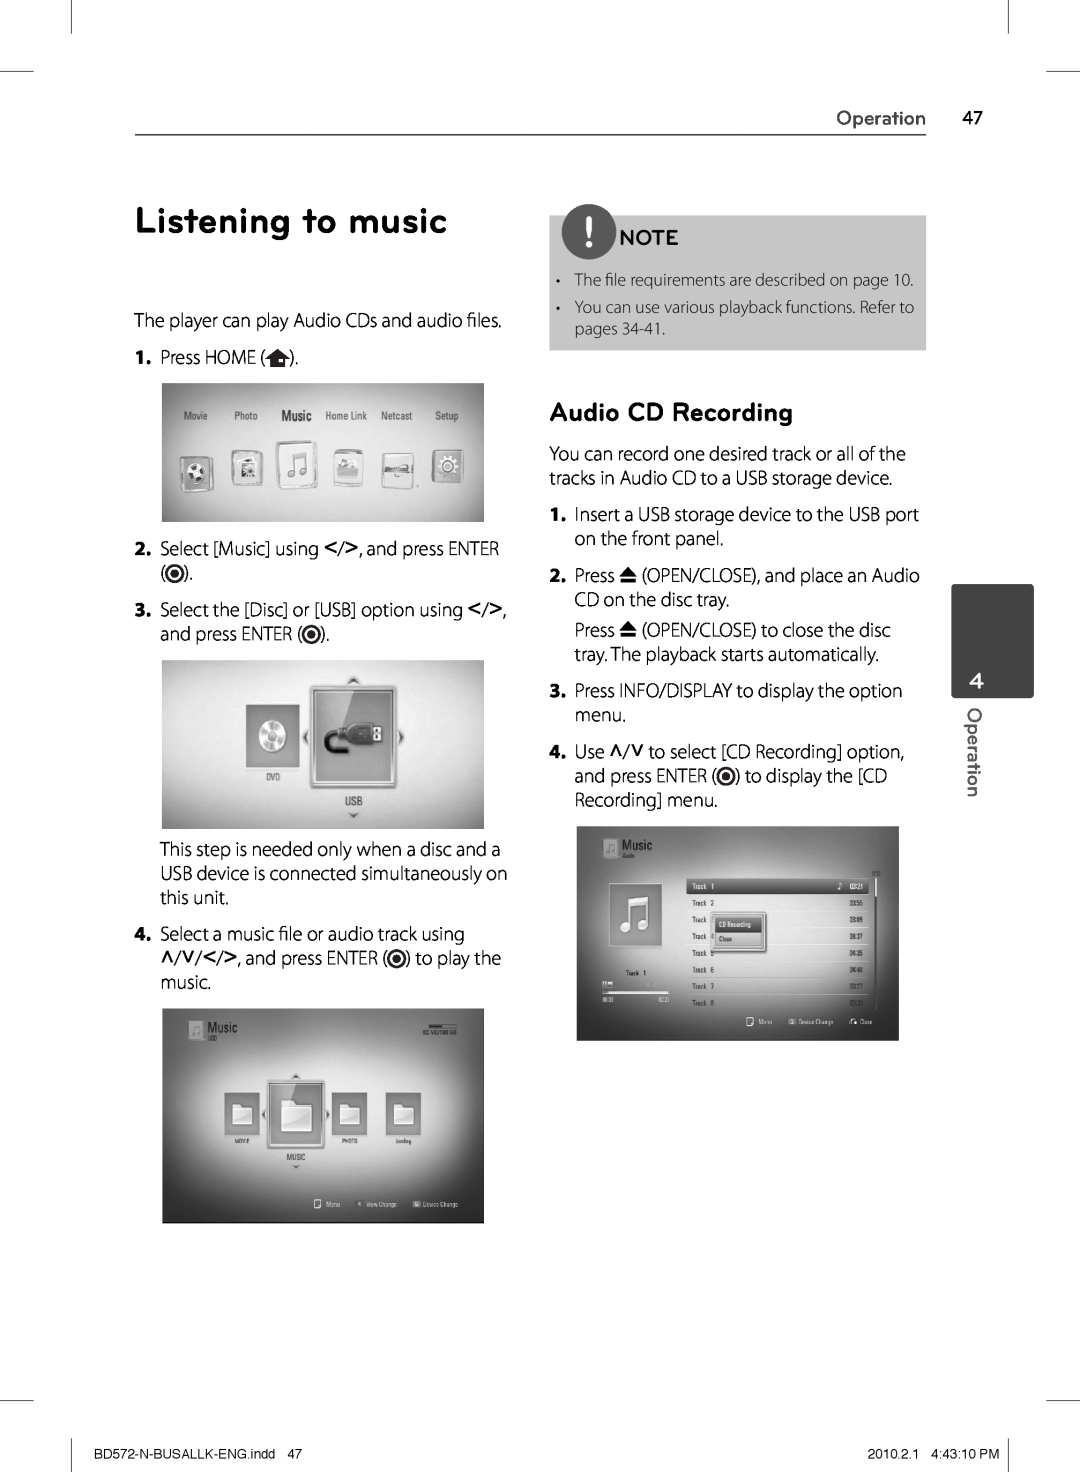 LG Electronics BD570 owner manual Listening to music, Audio CD Recording, Operation 